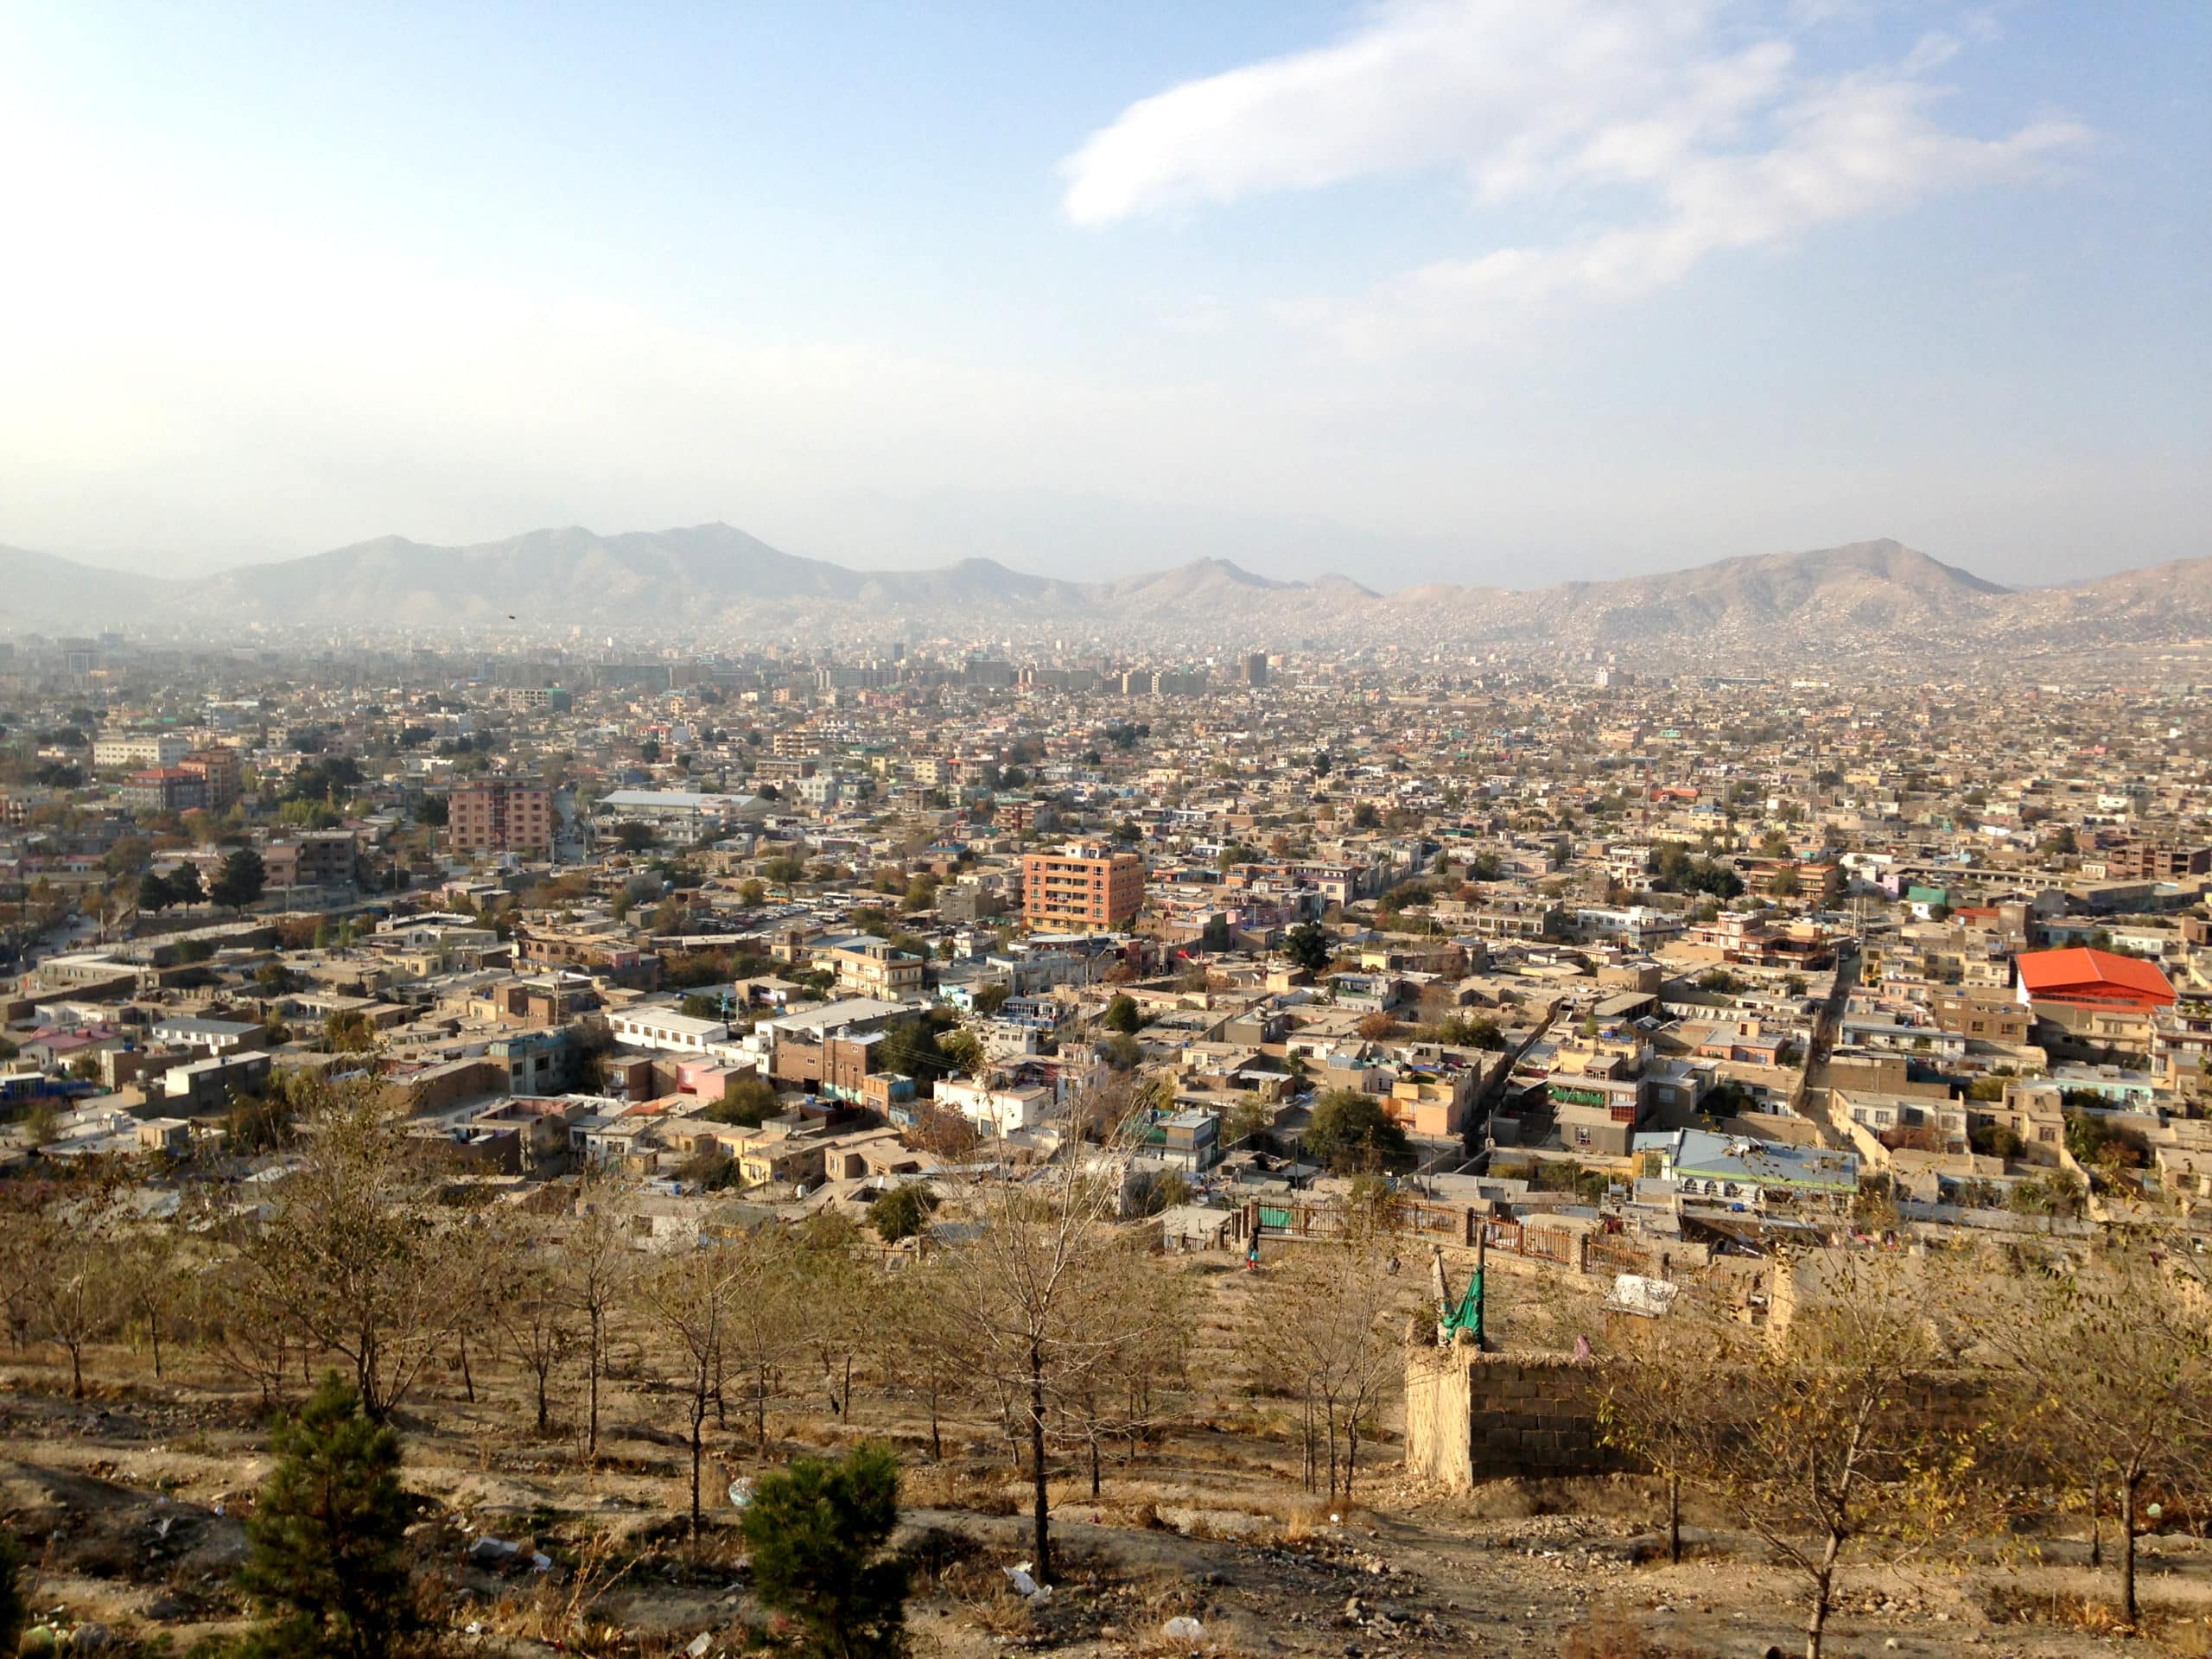 Despite the pandemic, Geres remains concerned and mobilised by the unique socio-economic crisis in Afghanistan